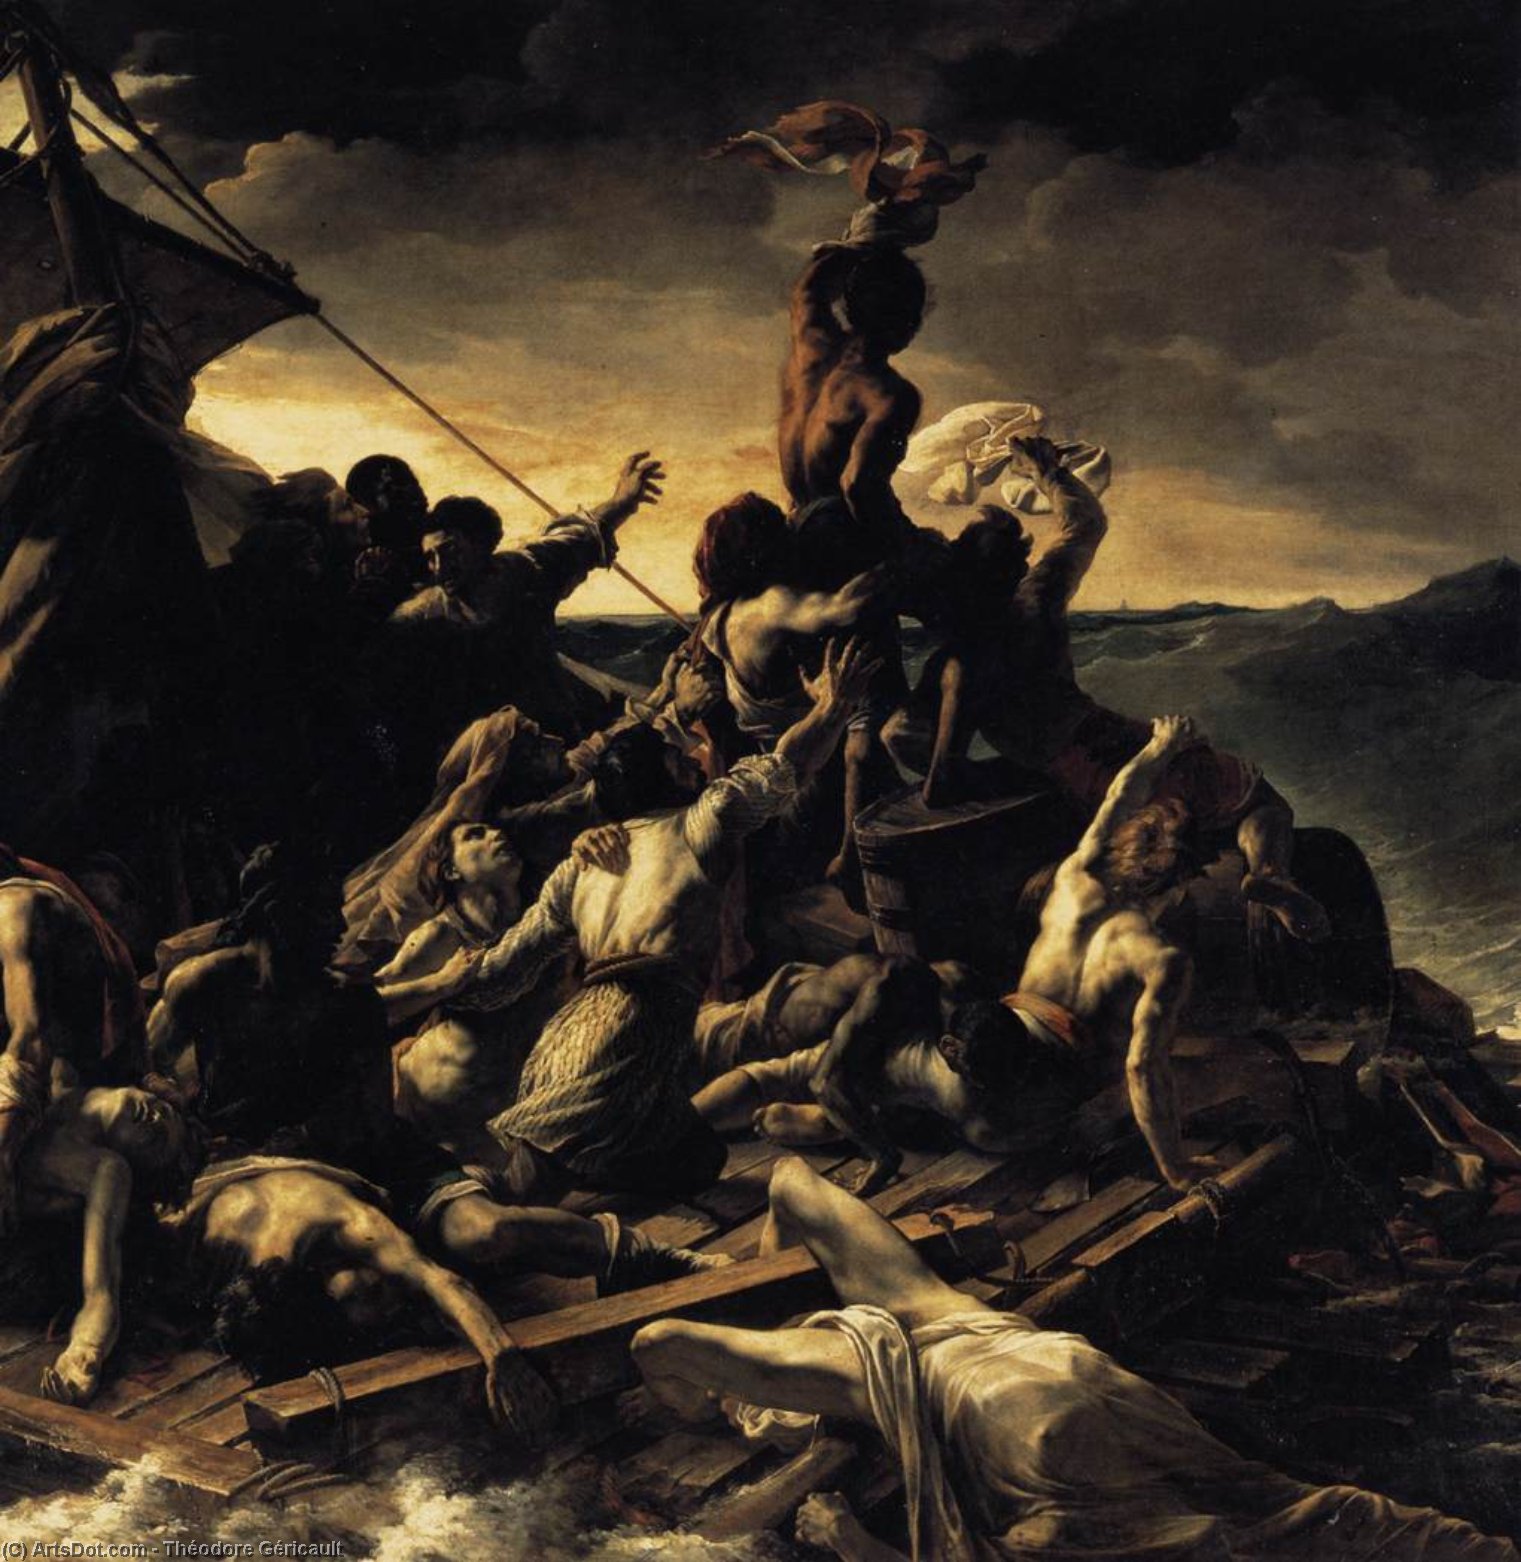 WikiOO.org - 百科事典 - 絵画、アートワーク Jean-Louis André Théodore Géricault - メドゥーサのいかだ 詳細